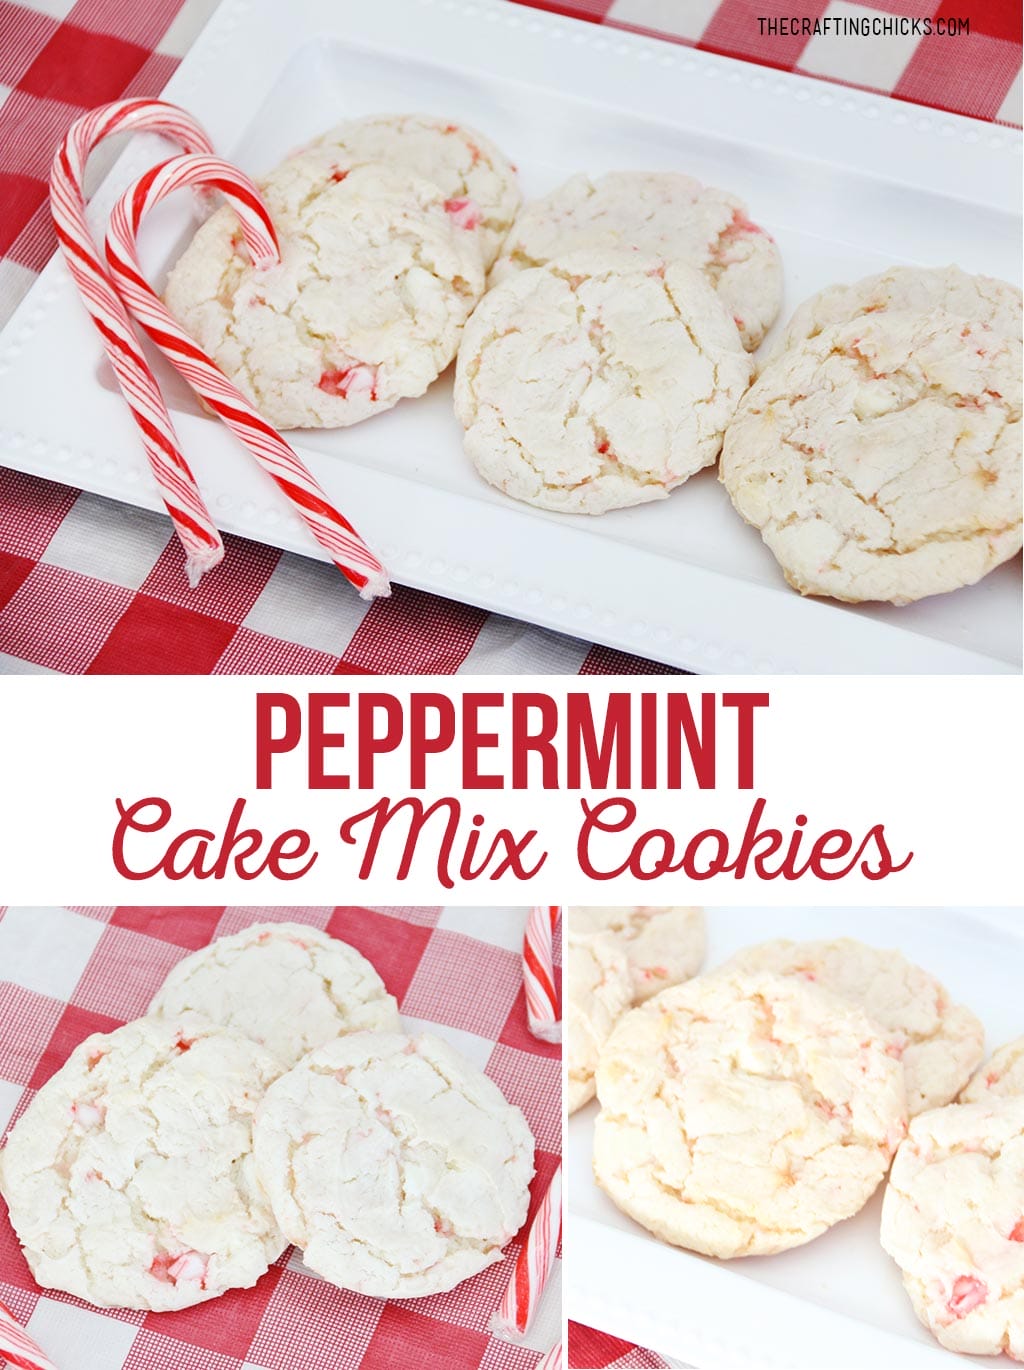 Peppermint Cake Mix Cookies - The Crafting Chicks